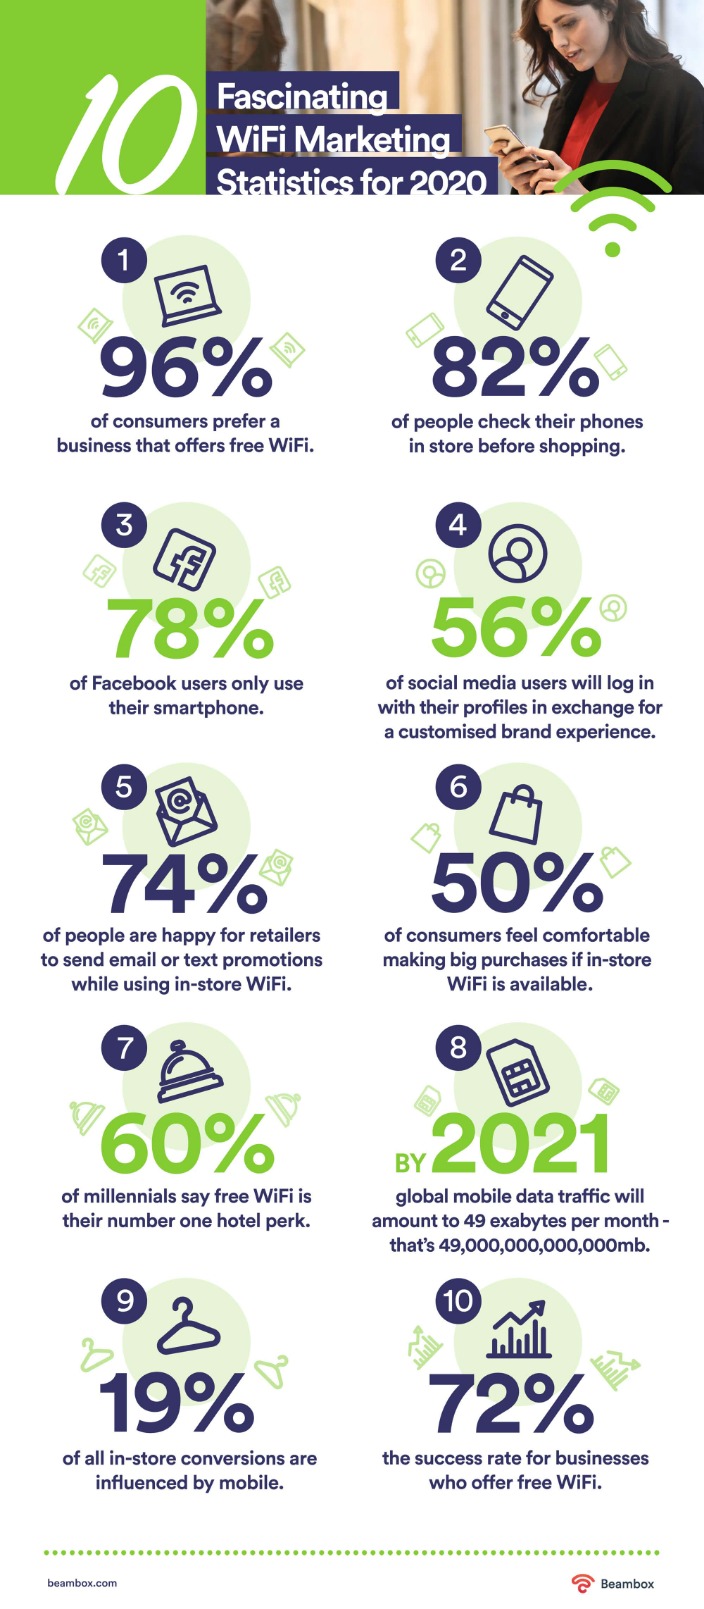 Get More Customers with WiFi Marketing